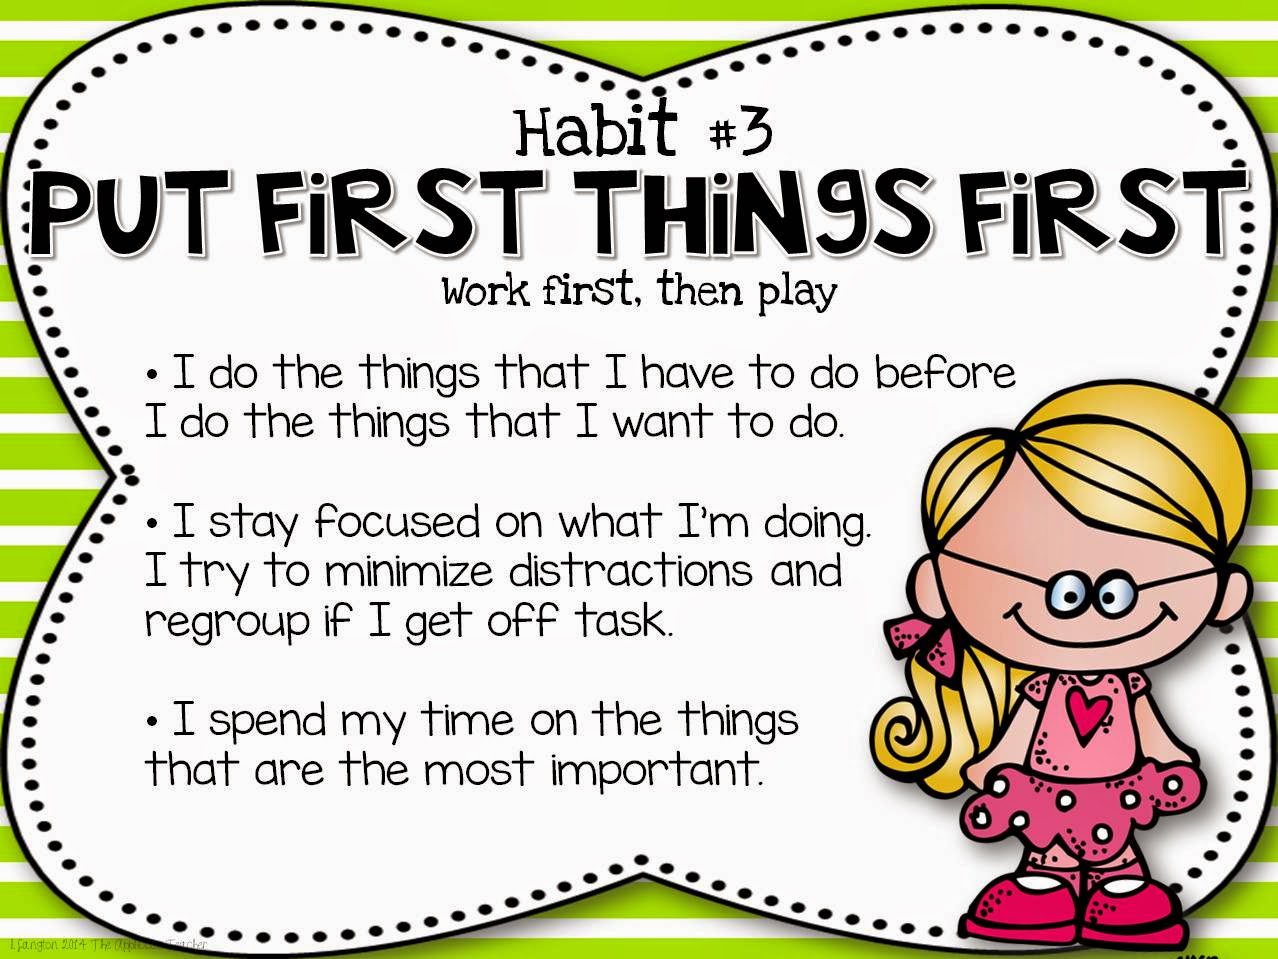 HABIT 3:  PUT FIRST THINGS FIRST